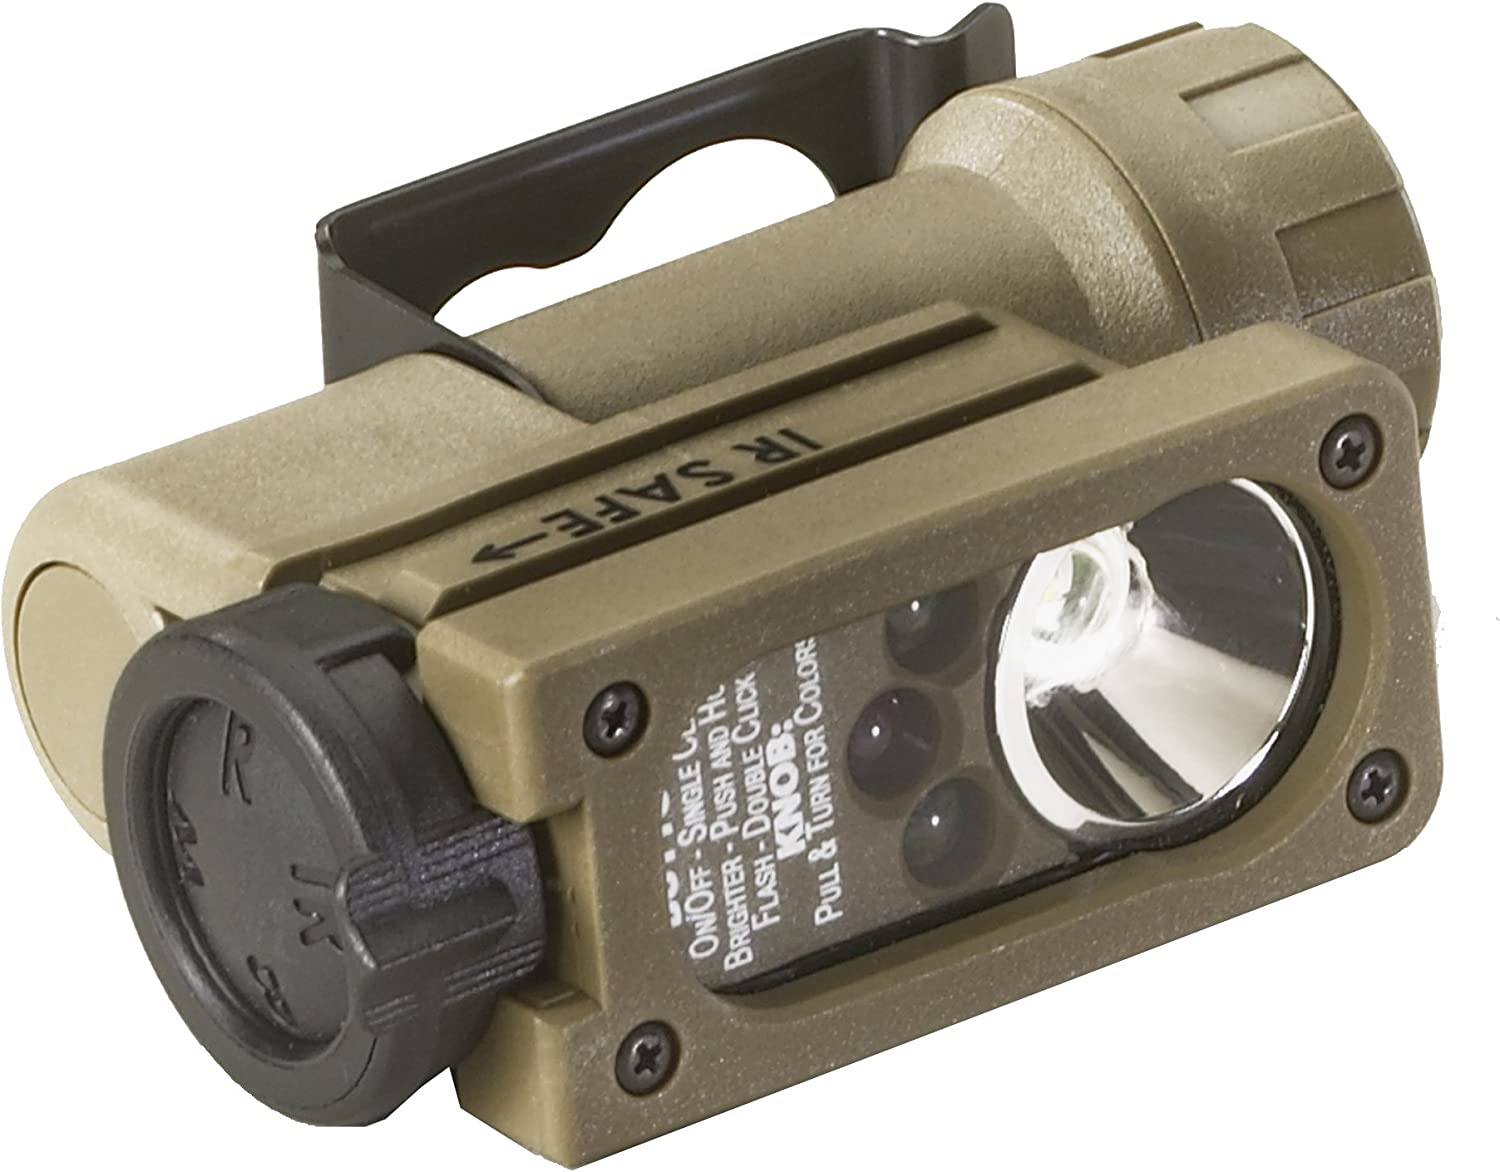 Streamlight 14102 Sidewinder 55-Lumens Compact Tactical Flashlight with LEDs, Helmet Mount and CR123A Lithium Battery, Coyote